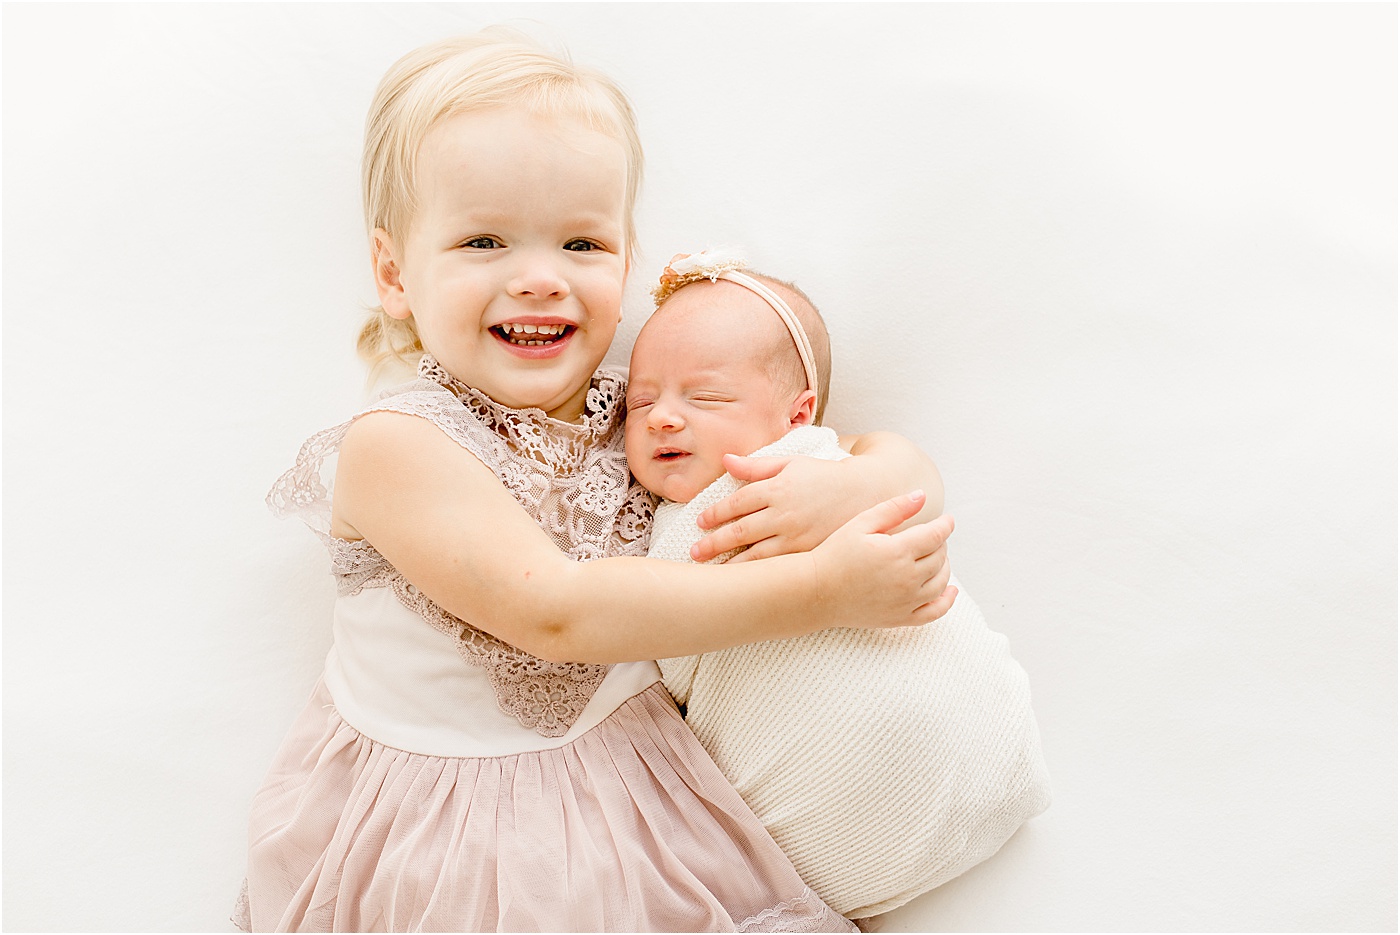 Big sister hugging baby during newborn session in natural light newborn photography studio in Austin.